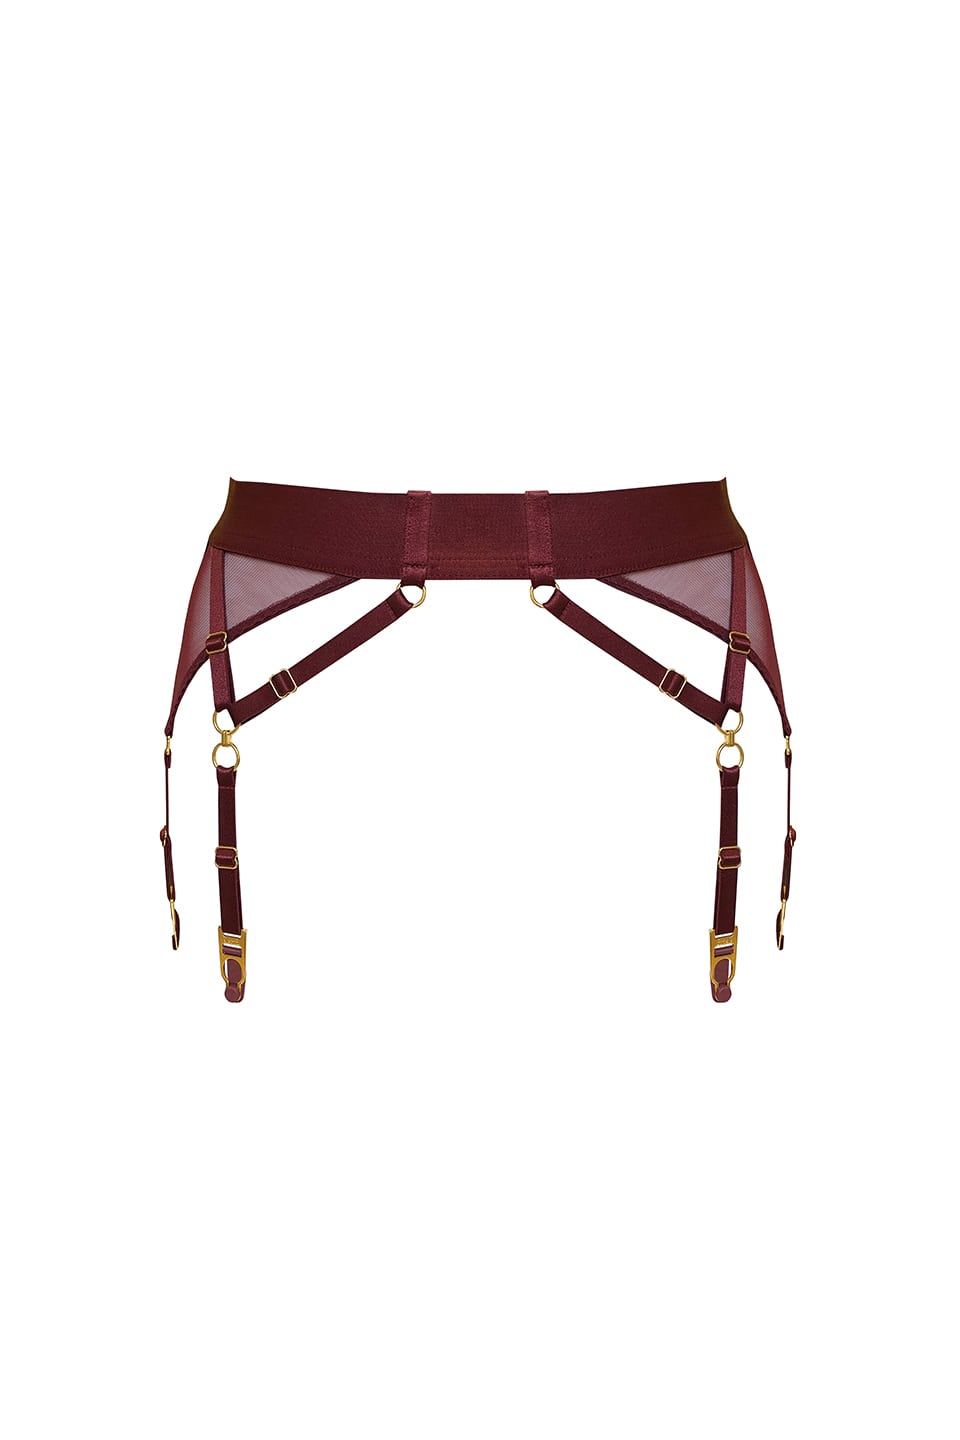 Thumbnail for Product gallery 1, Dia Suspender Burgundy